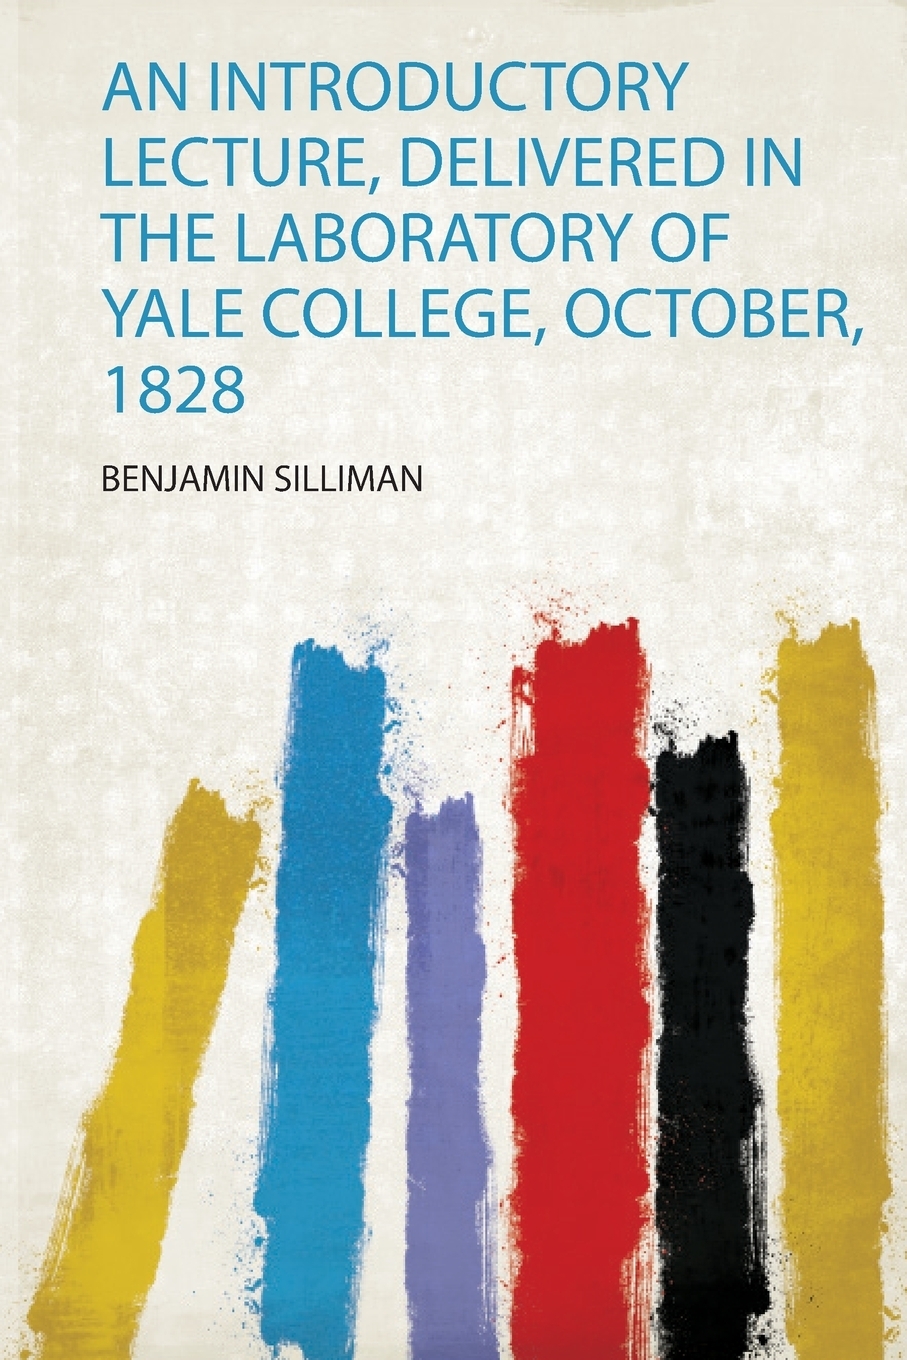 An Introductory Lecture, Delivered in the Laboratory of Yale College, October, 1828